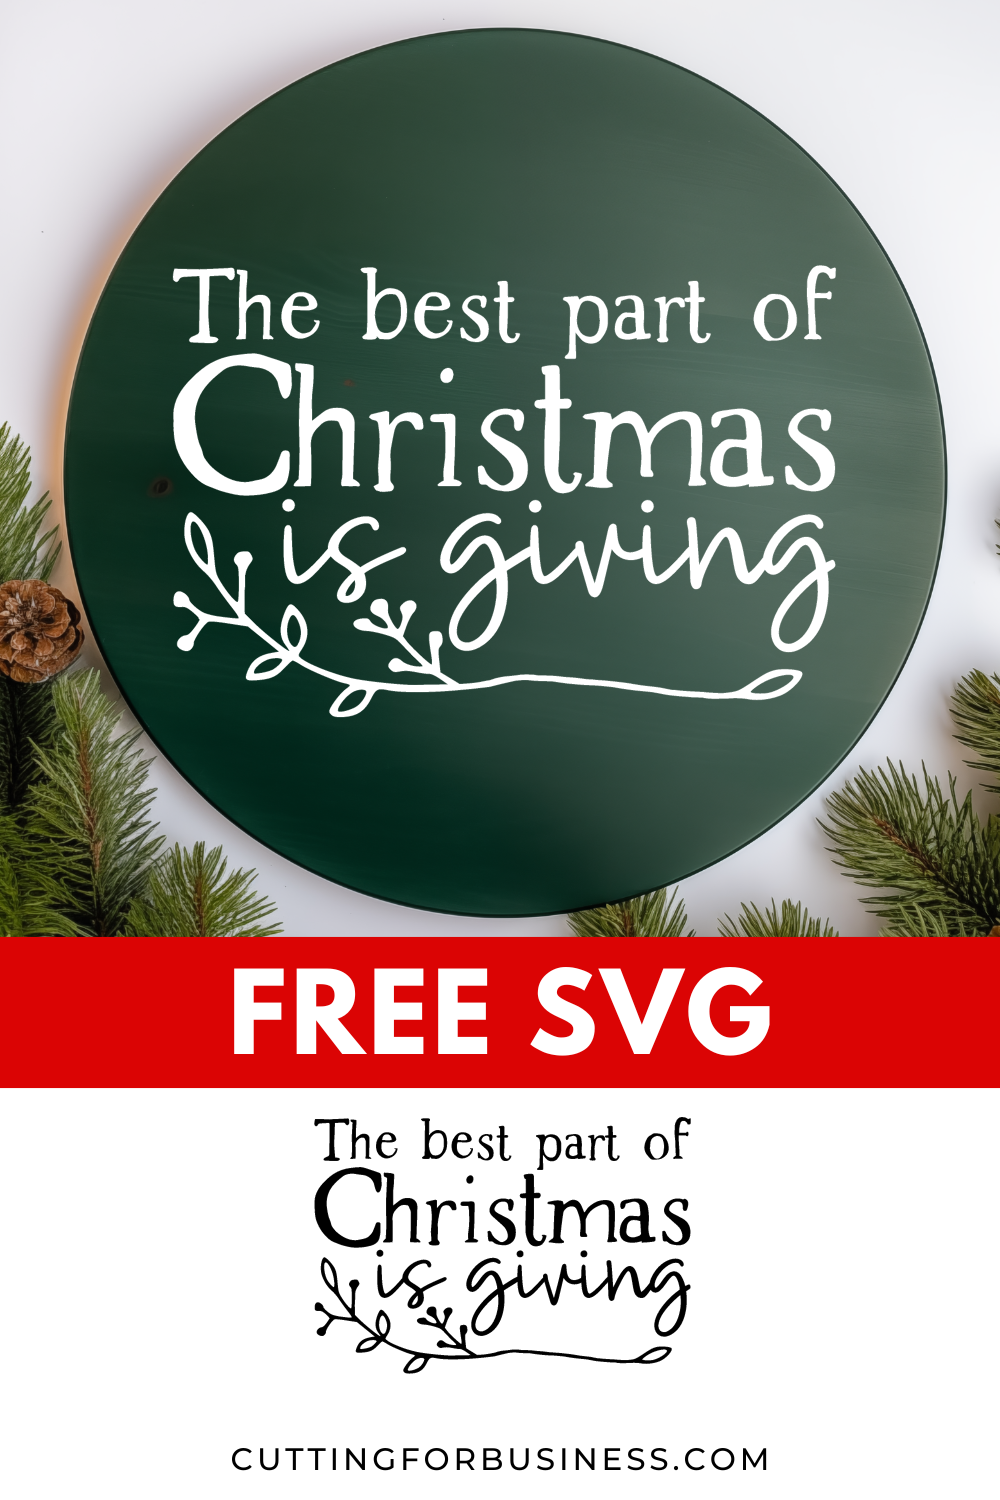 Free Christmas SVG - The Best Part of Christmas is Giving. Perfect for xTool, Glowforge, Silhouette, Cricut, Juliet, and more - cuttingforbusiness.com